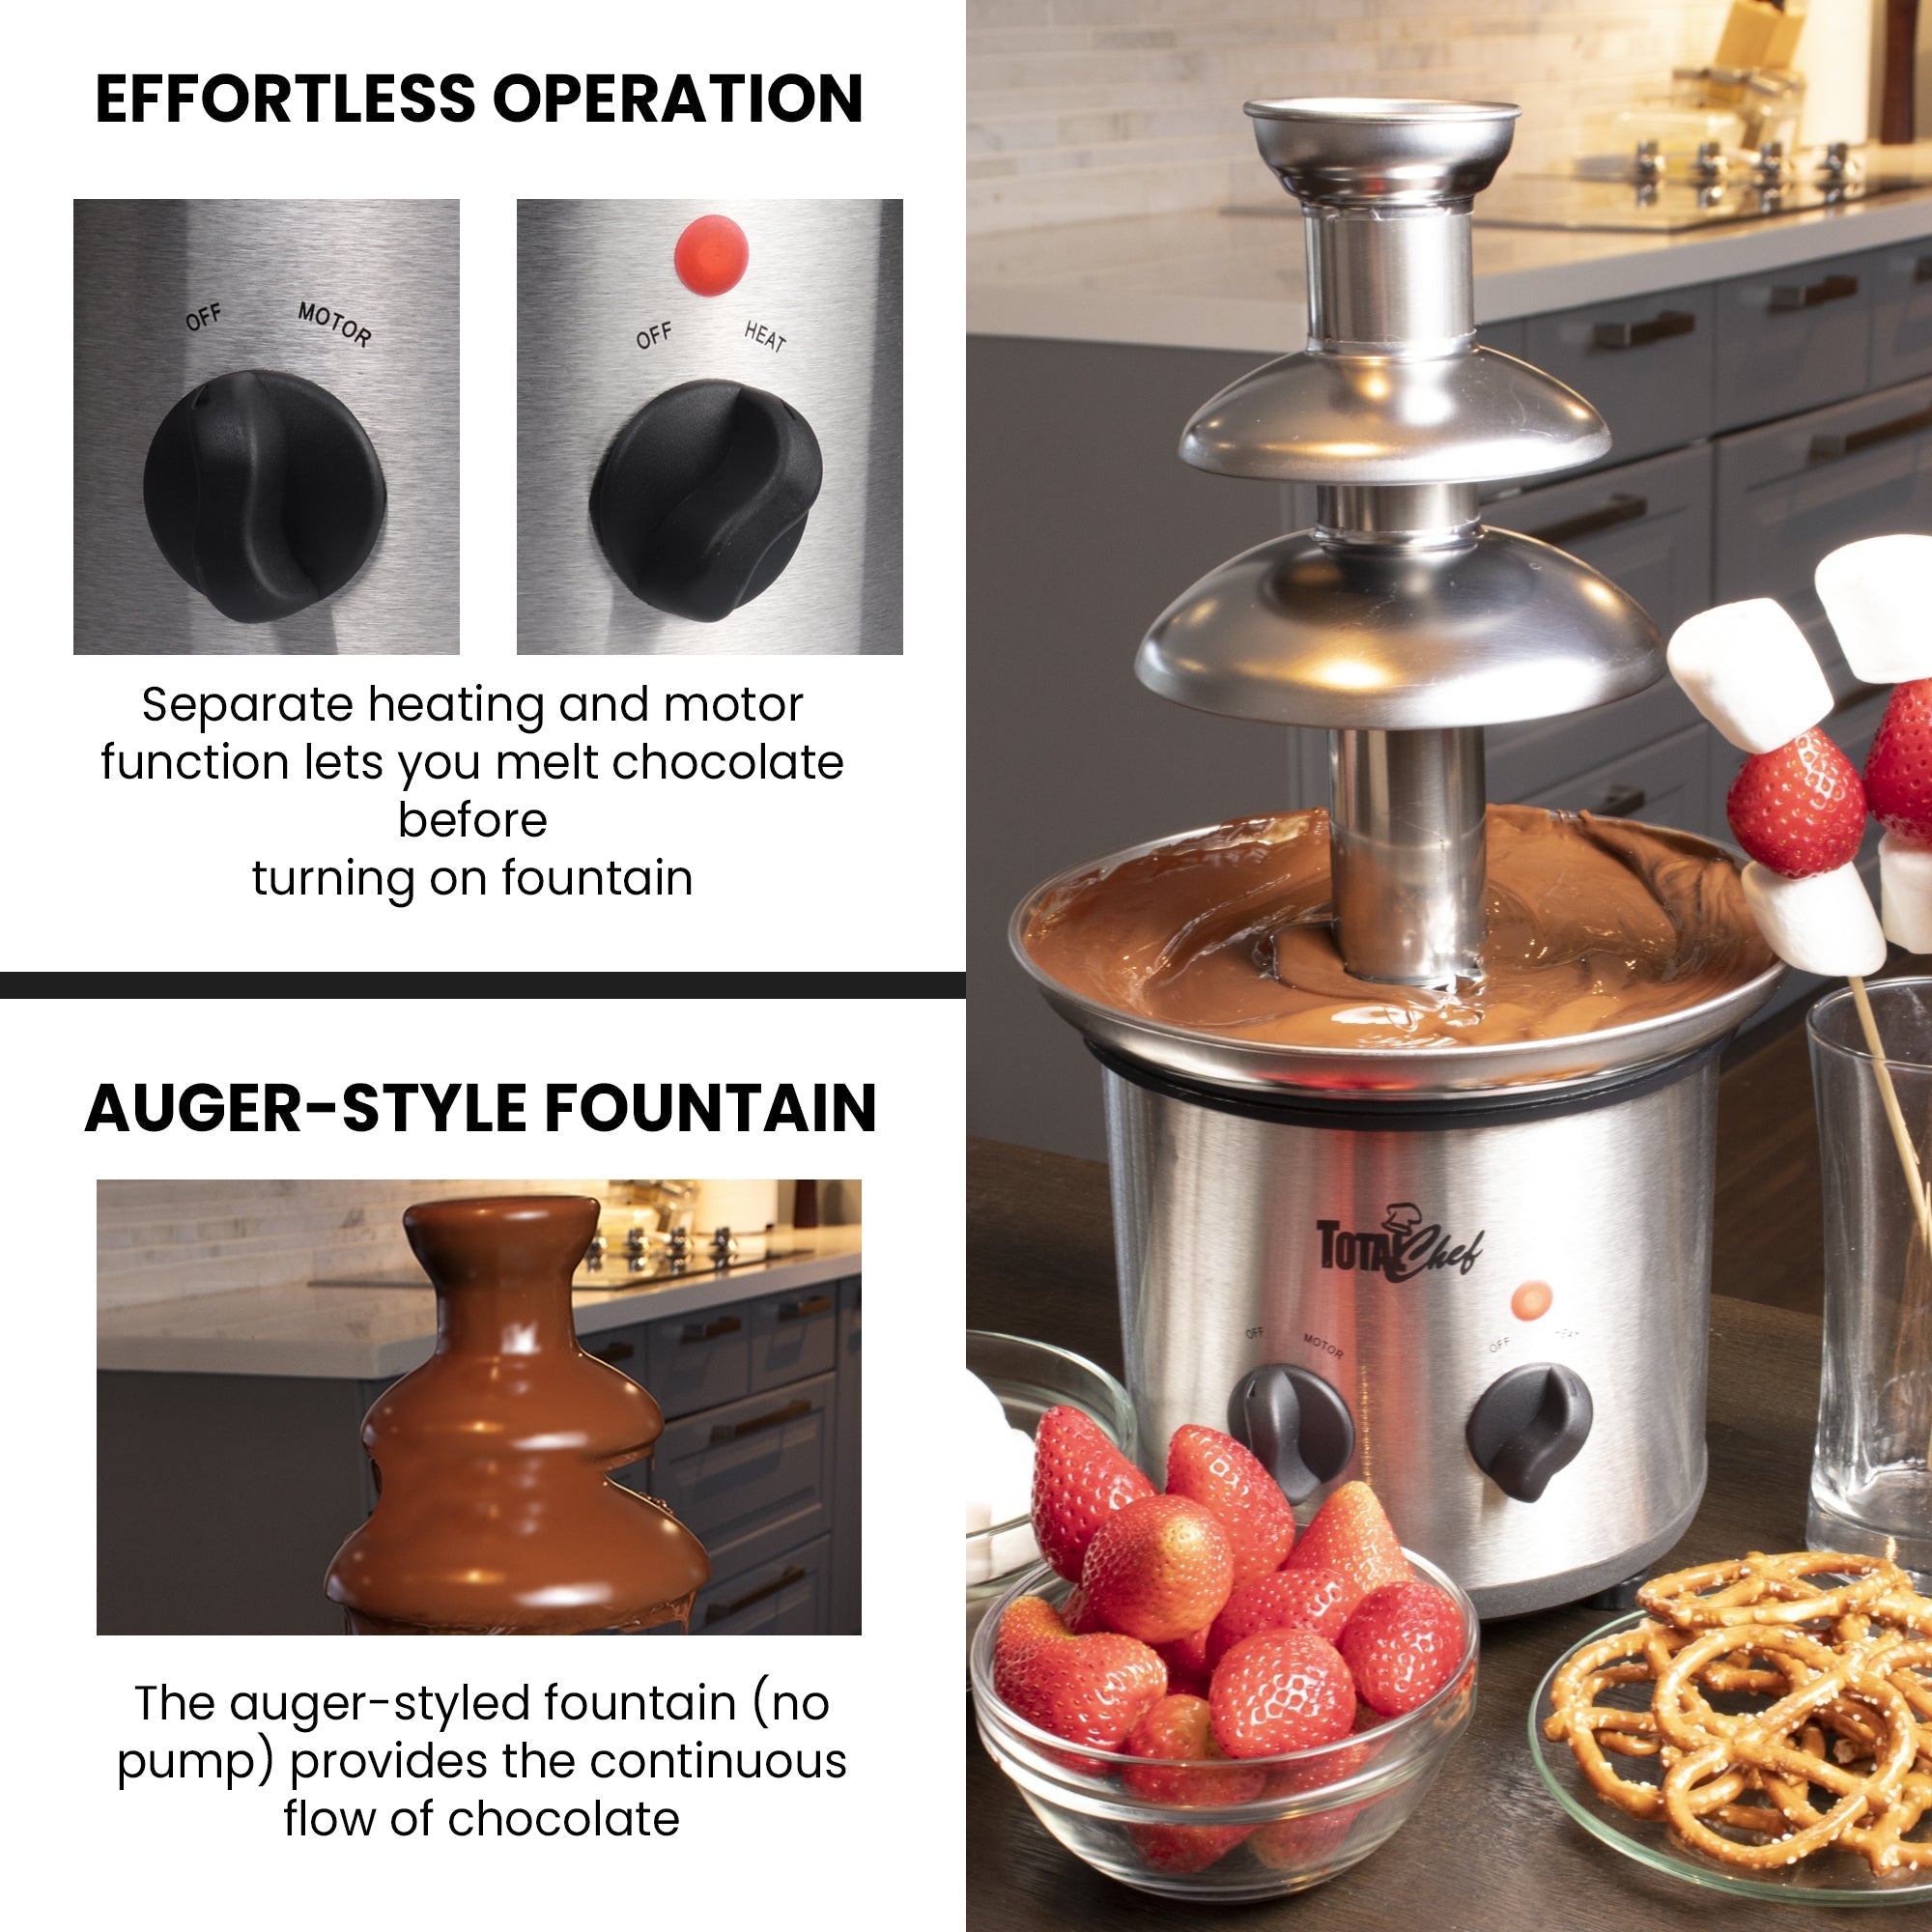 On the right is a lifestyle image of the fountain filled with melted chocolate with skewers and bowls of marshmallows, strawberries and pretzels. Top left shows closeups of control dials with text reading “Effortless operation: separate heating and motor function lets you melt chocolate before turning on fountain.” Bottom left is a closeup of fountain tiers with melted chocolate and text reading, “Auger-style fountain (no pump) provides the continuous flow of chocolate” 